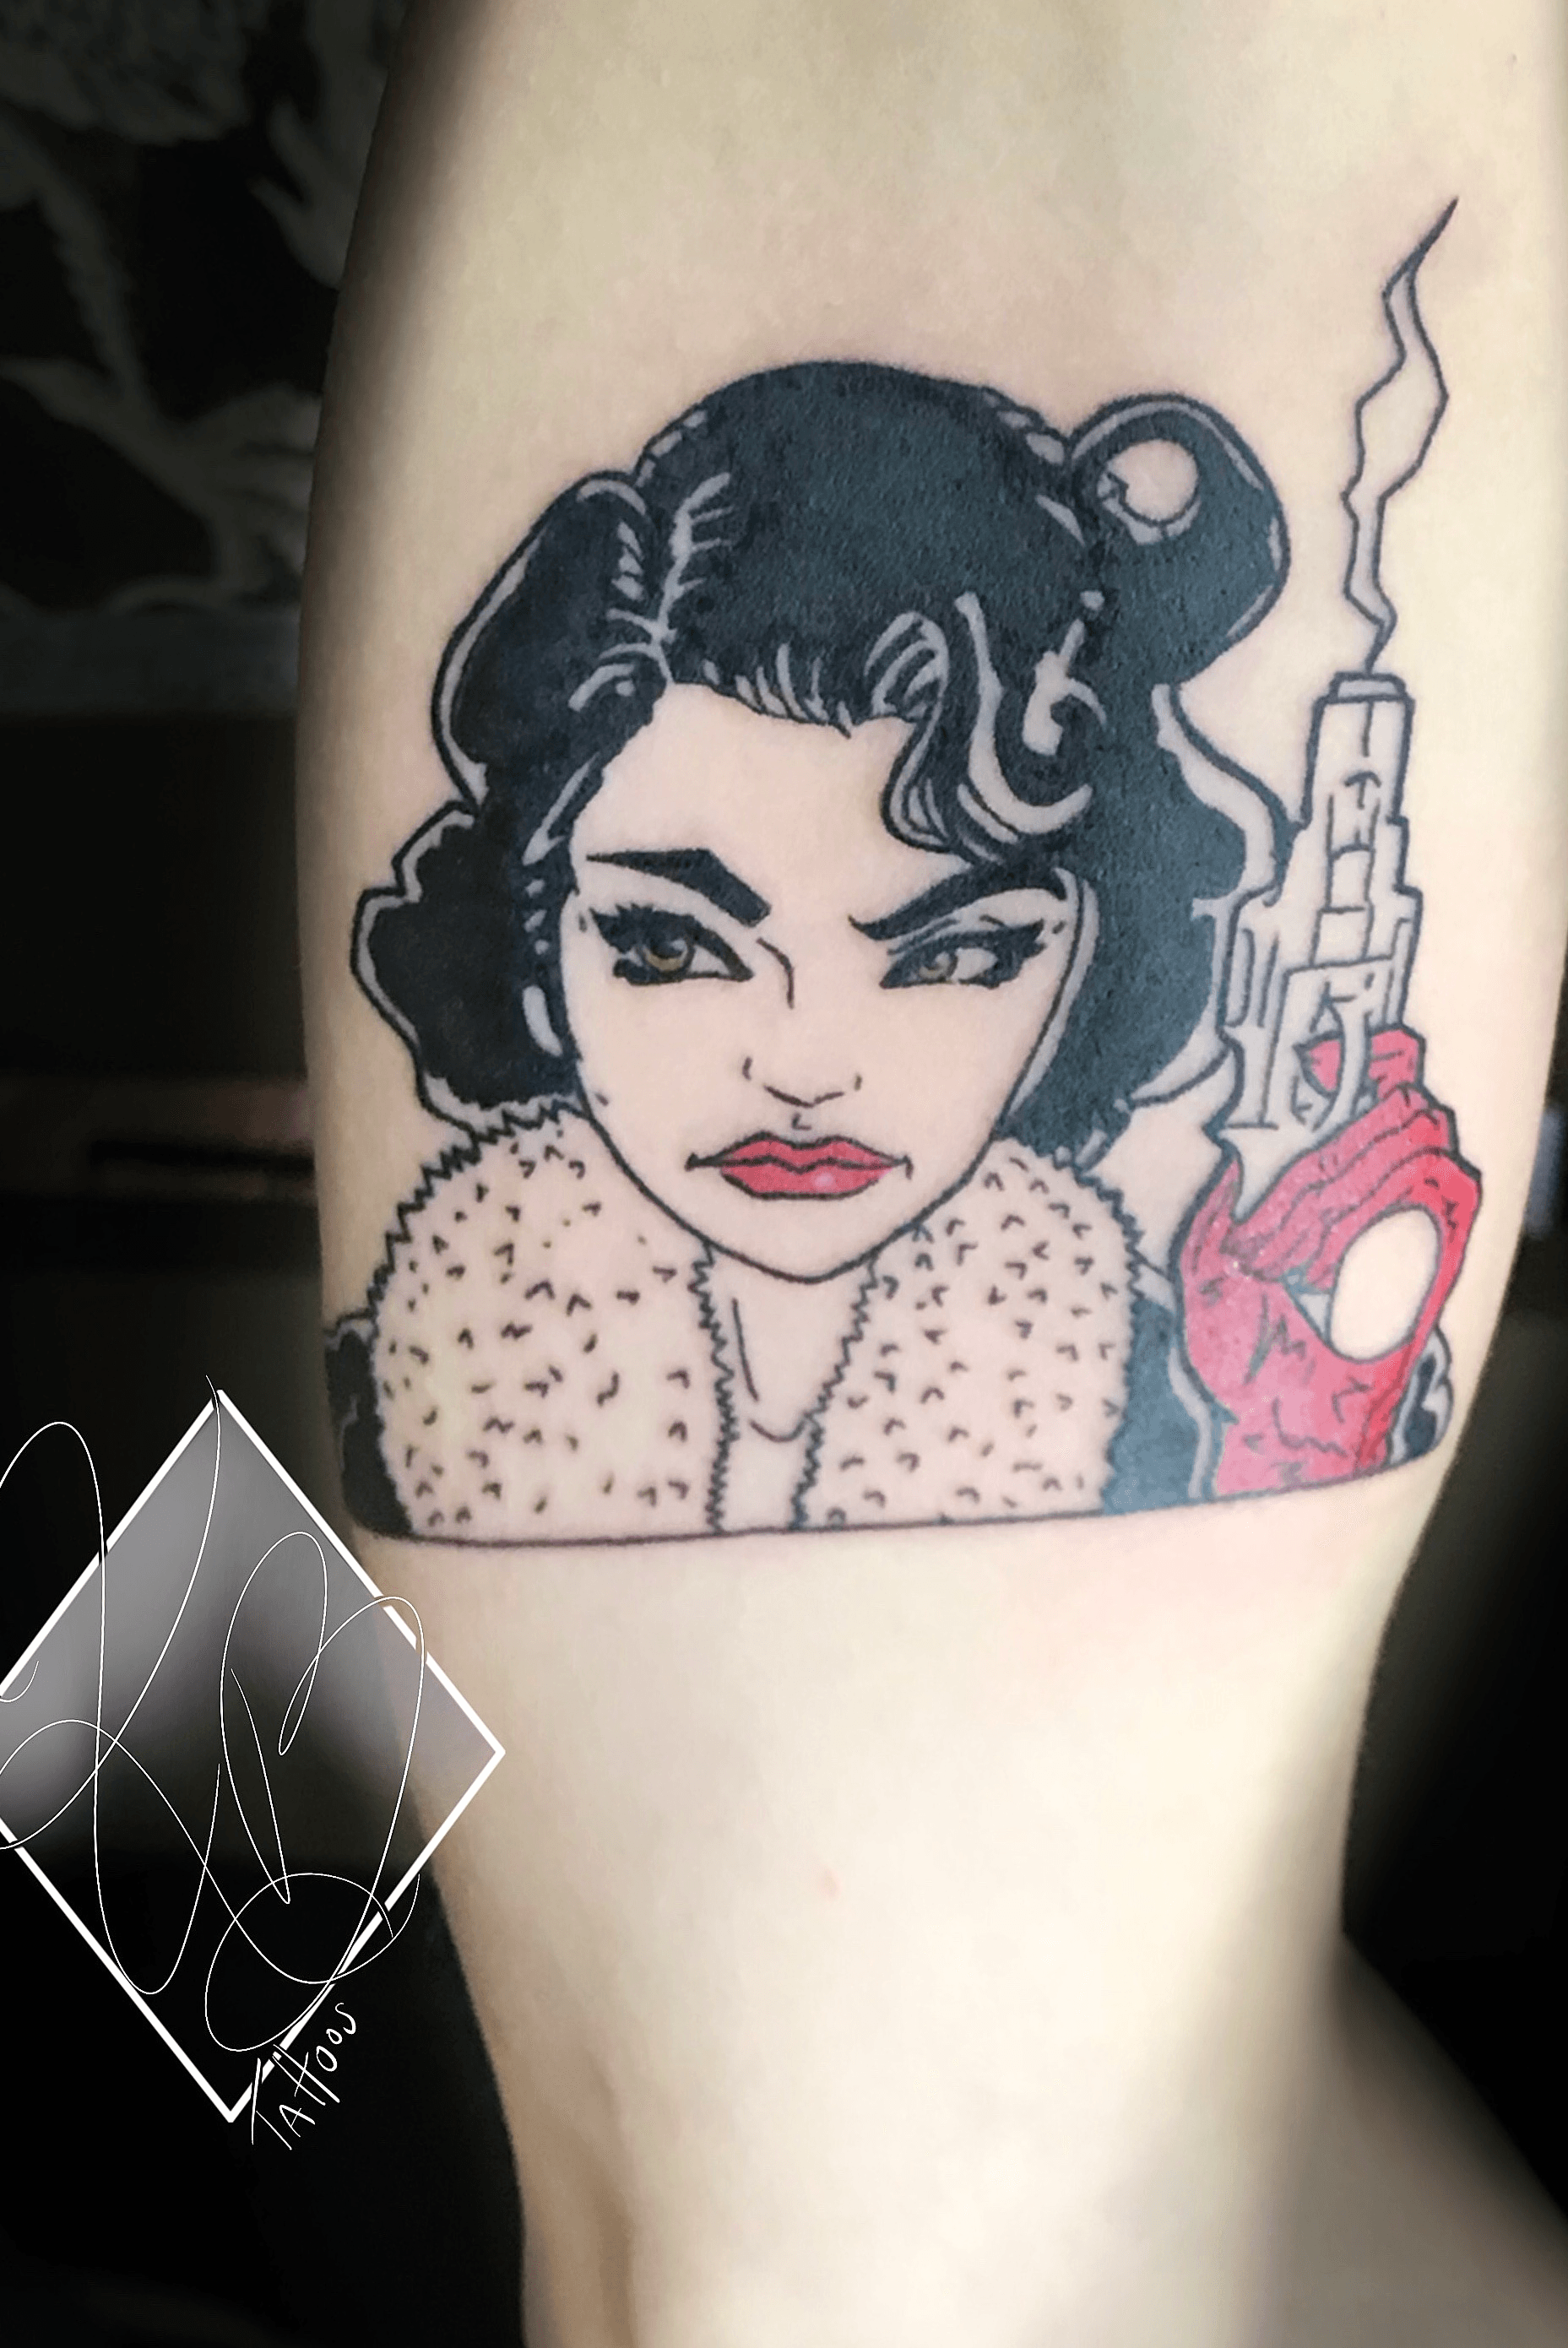 Chapel Street Tattoo on Twitter Lauren got to tattoo this portrait of the  lovely VioletChachki  check out our next video that well be posting  tattoo tattooartist chapelstreettattoostudio chorley portrait  dragqueen httpstcoTfaTPoQWiG 